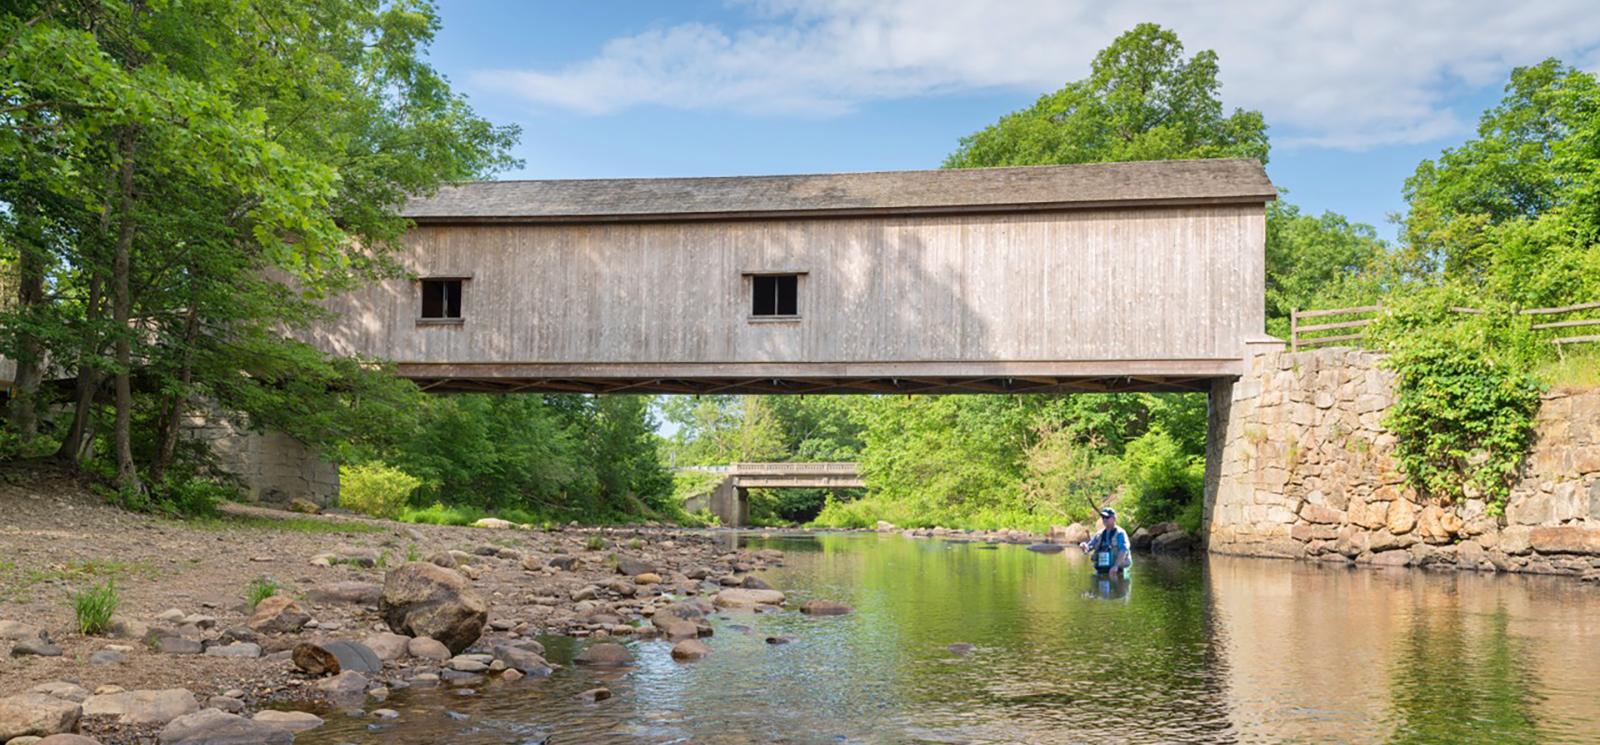 A fisherman in the water under a covered bridge (CTVisit)